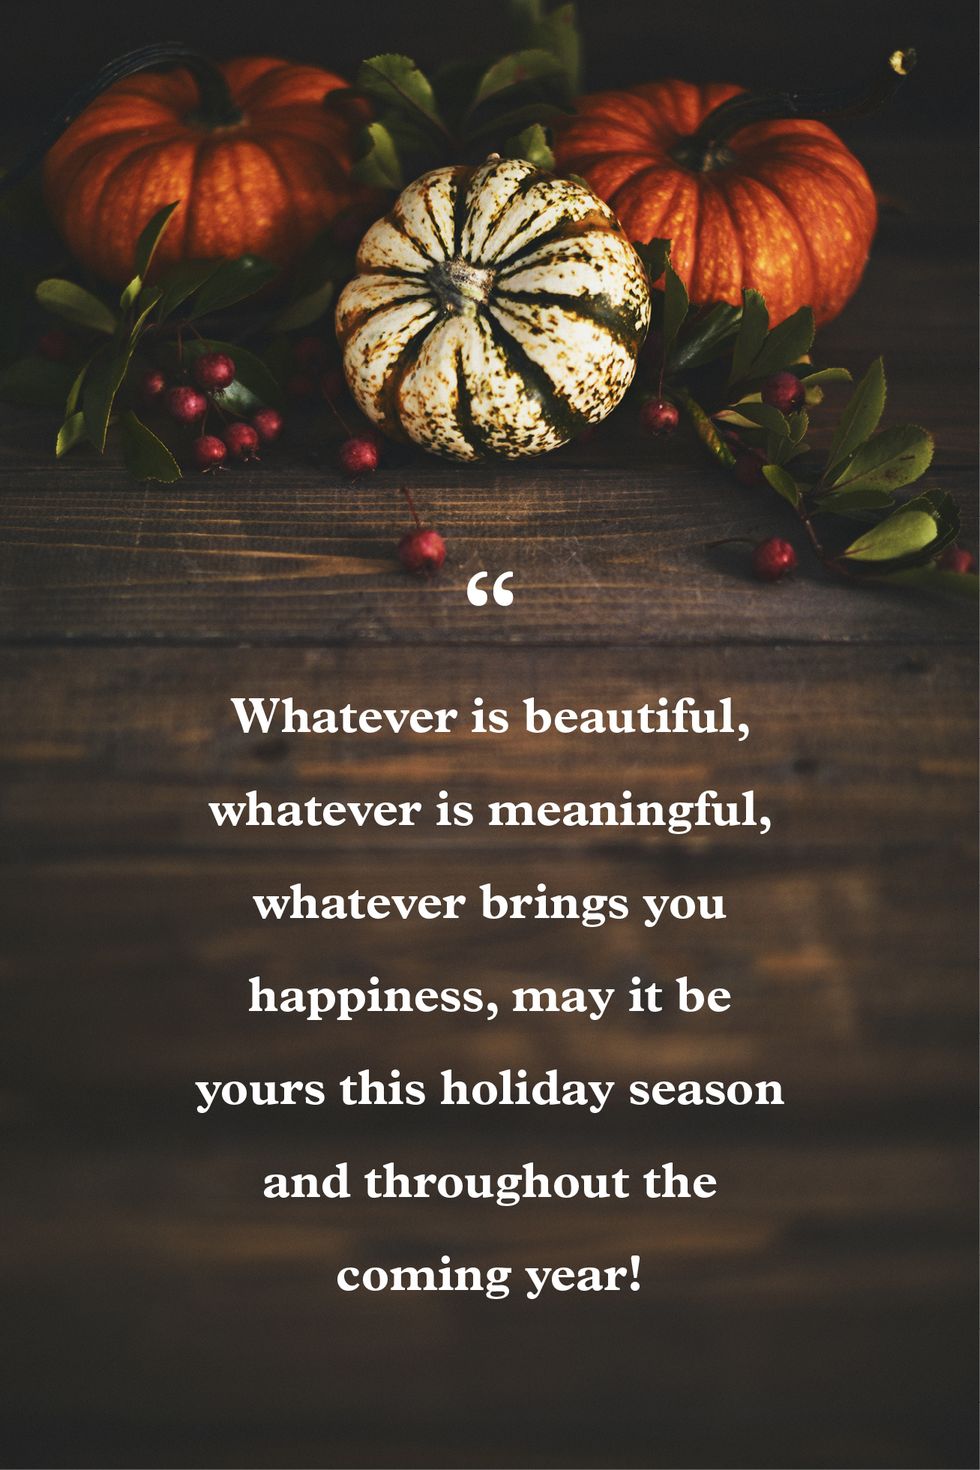 47 Happy Thanksgiving Blessings to Celebrate the Holiday (and Good